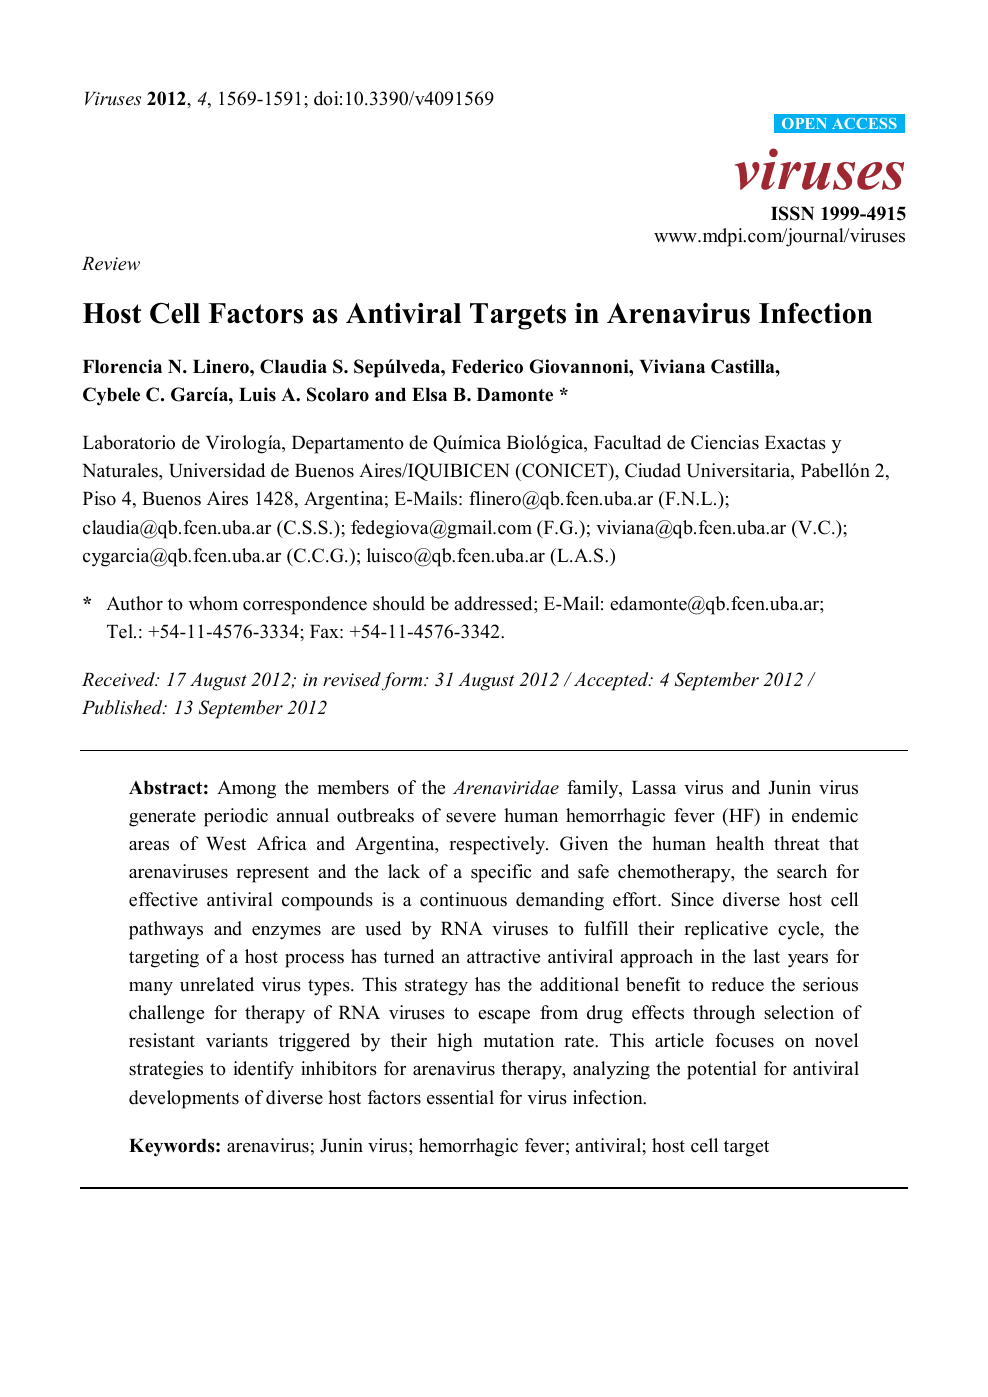 Host Cell Factors As Antiviral Targets In Arenavirus Infection Topic Of Research Paper In Biological Sciences Download Scholarly Article Pdf And Read For Free On Cyberleninka Open Science Hub